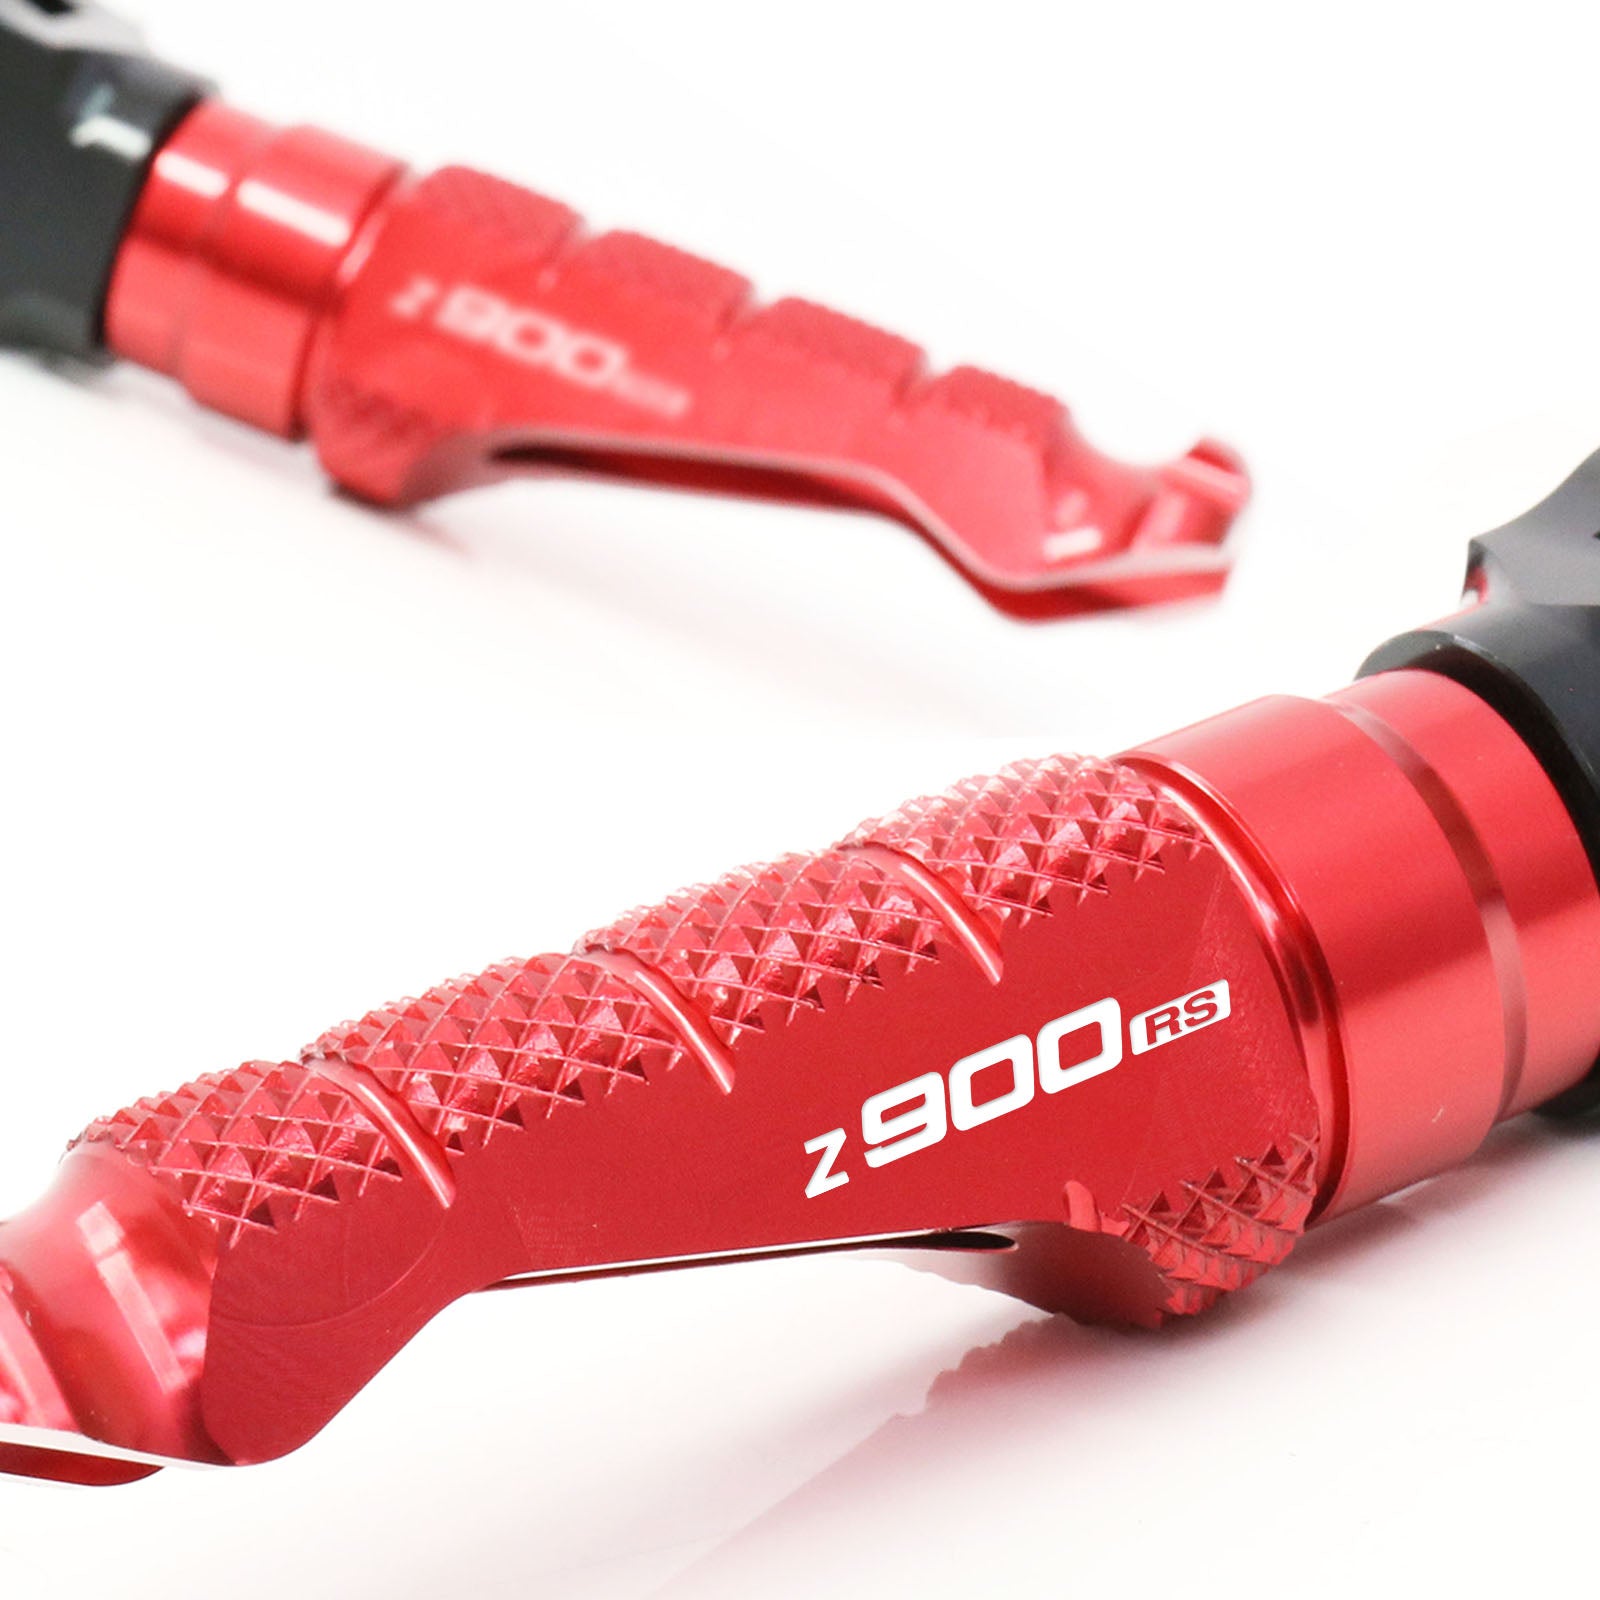 Kawasaki Z900RS Caf?Racer logo engraved front Red Foot Pegs